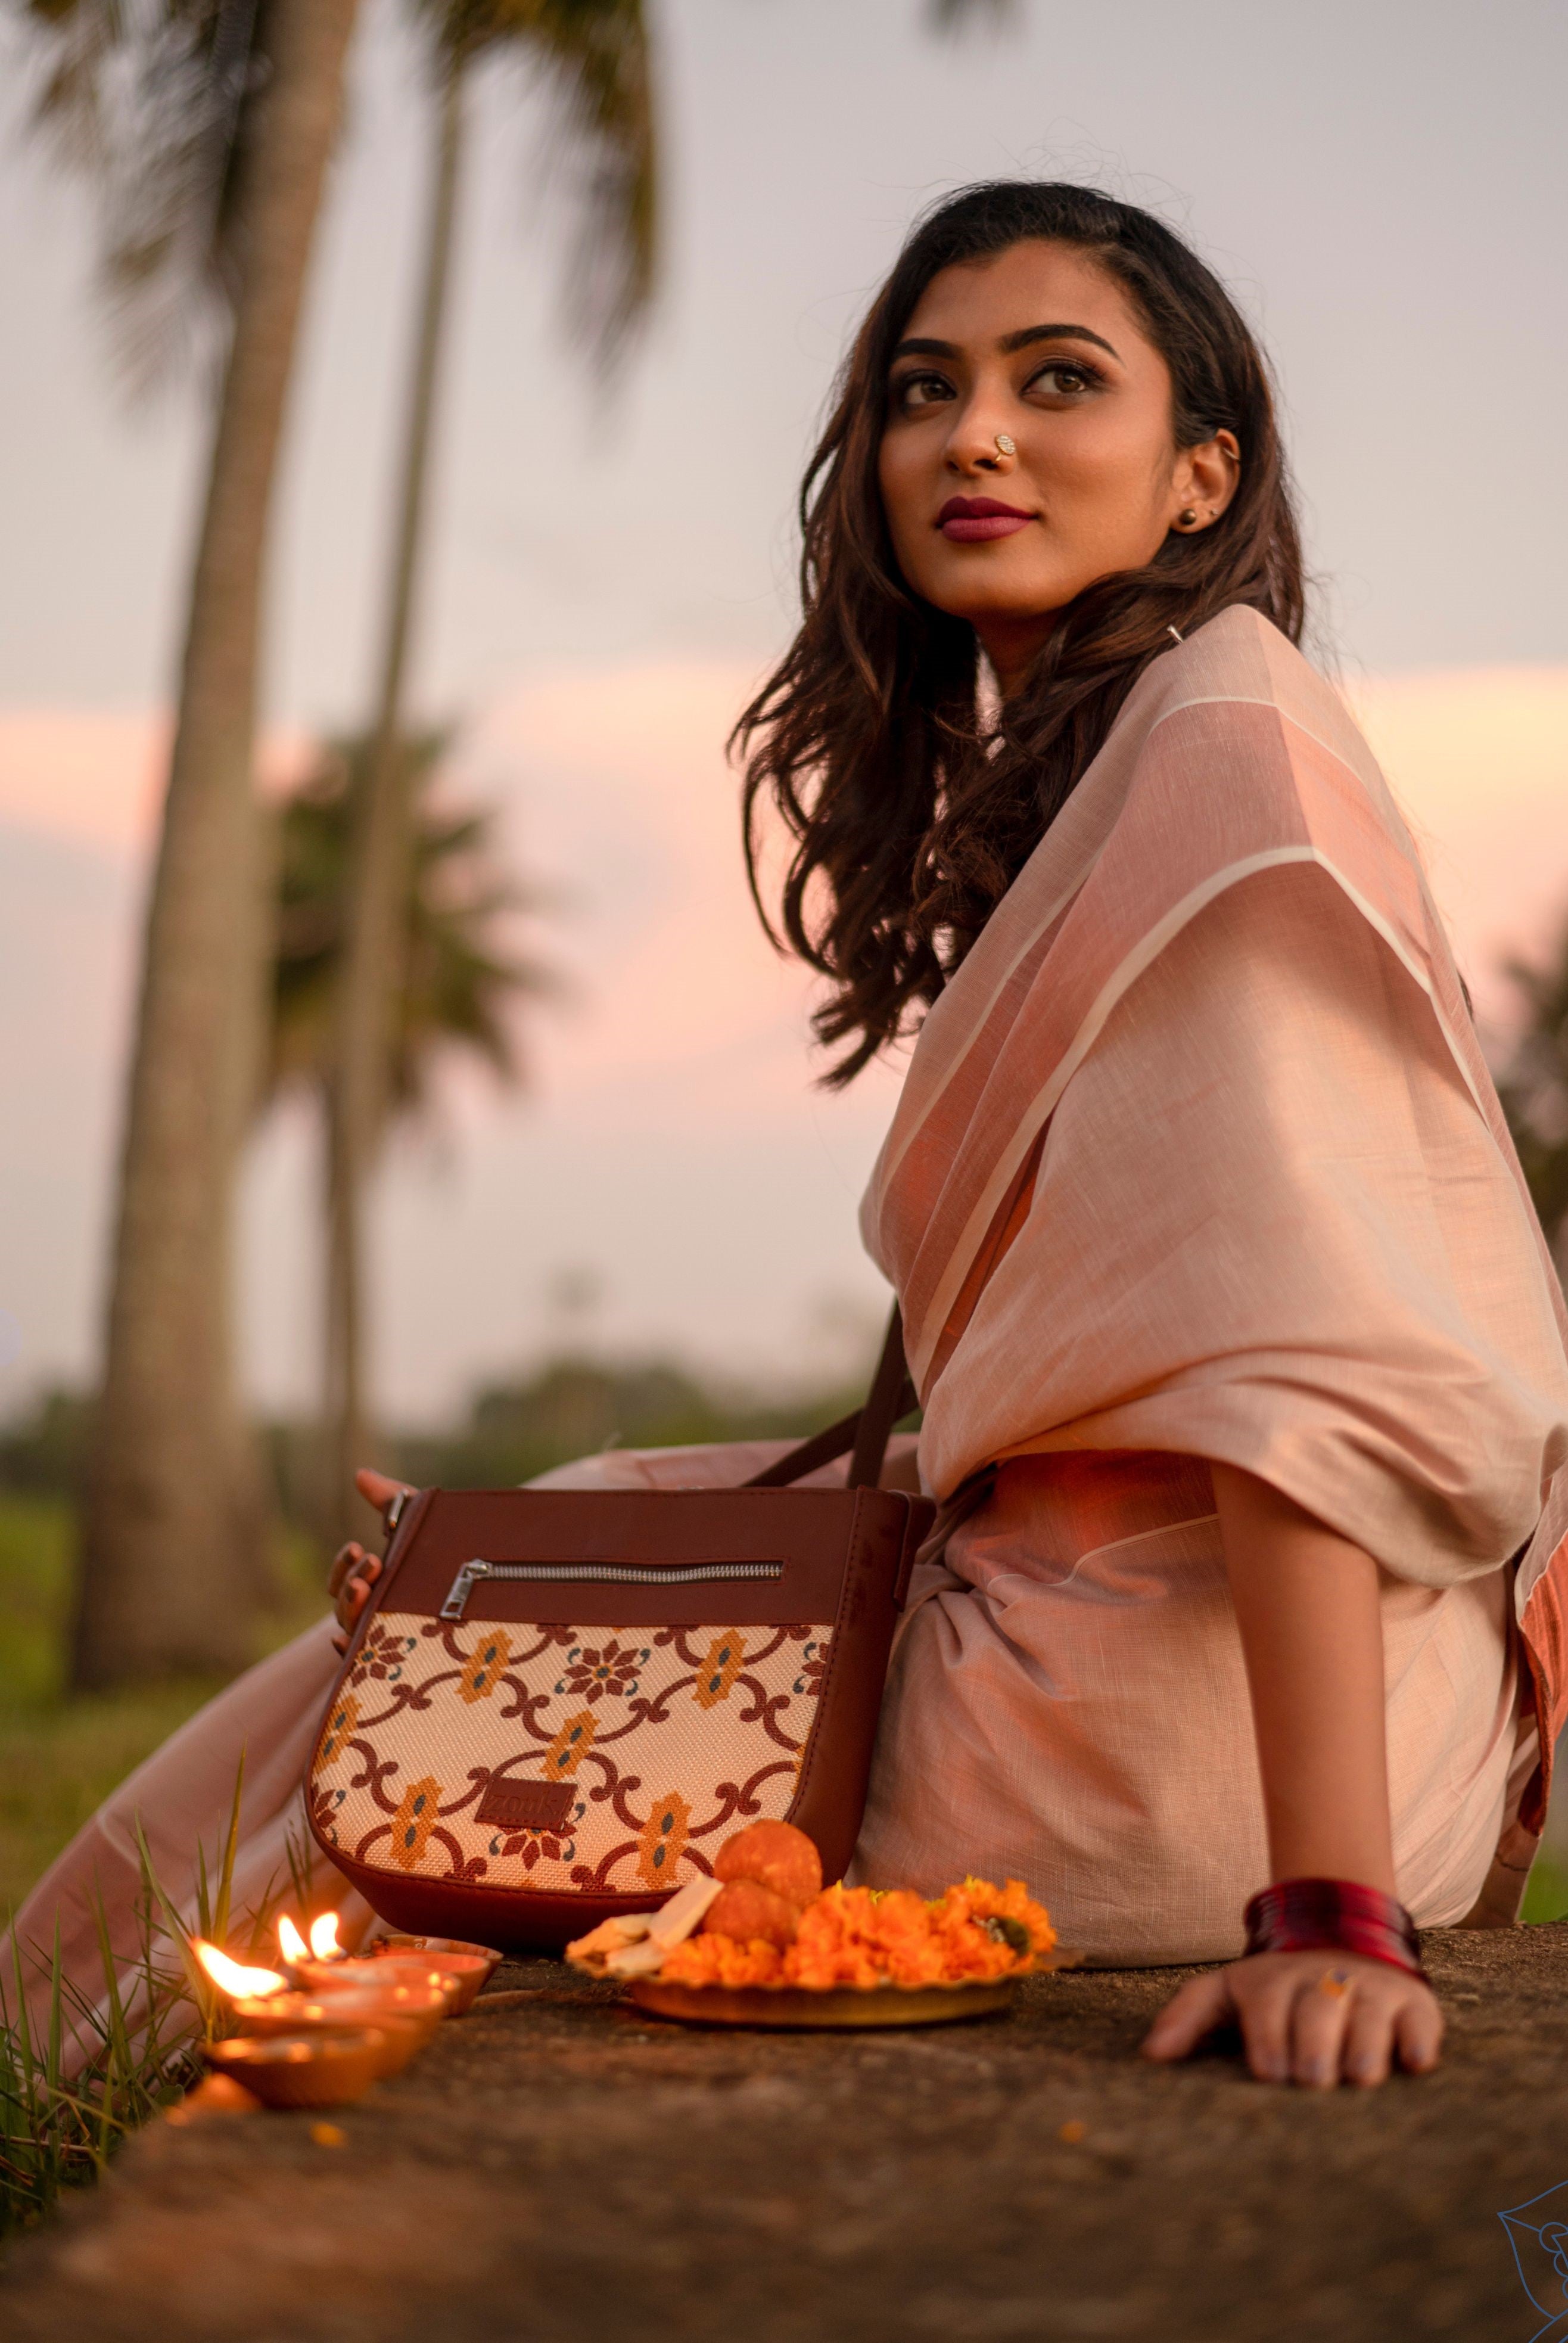 Sabyasachi - The Sabyasachi Autumn/Winter 2021 Collection Womenswear,  jewellery @sabyasachijewelry and accessories @sabyasachiaccessories  Disclaimer: The Tropical Sling bag featured in the image has been made  using faux fur. At Sabyasachi, we do